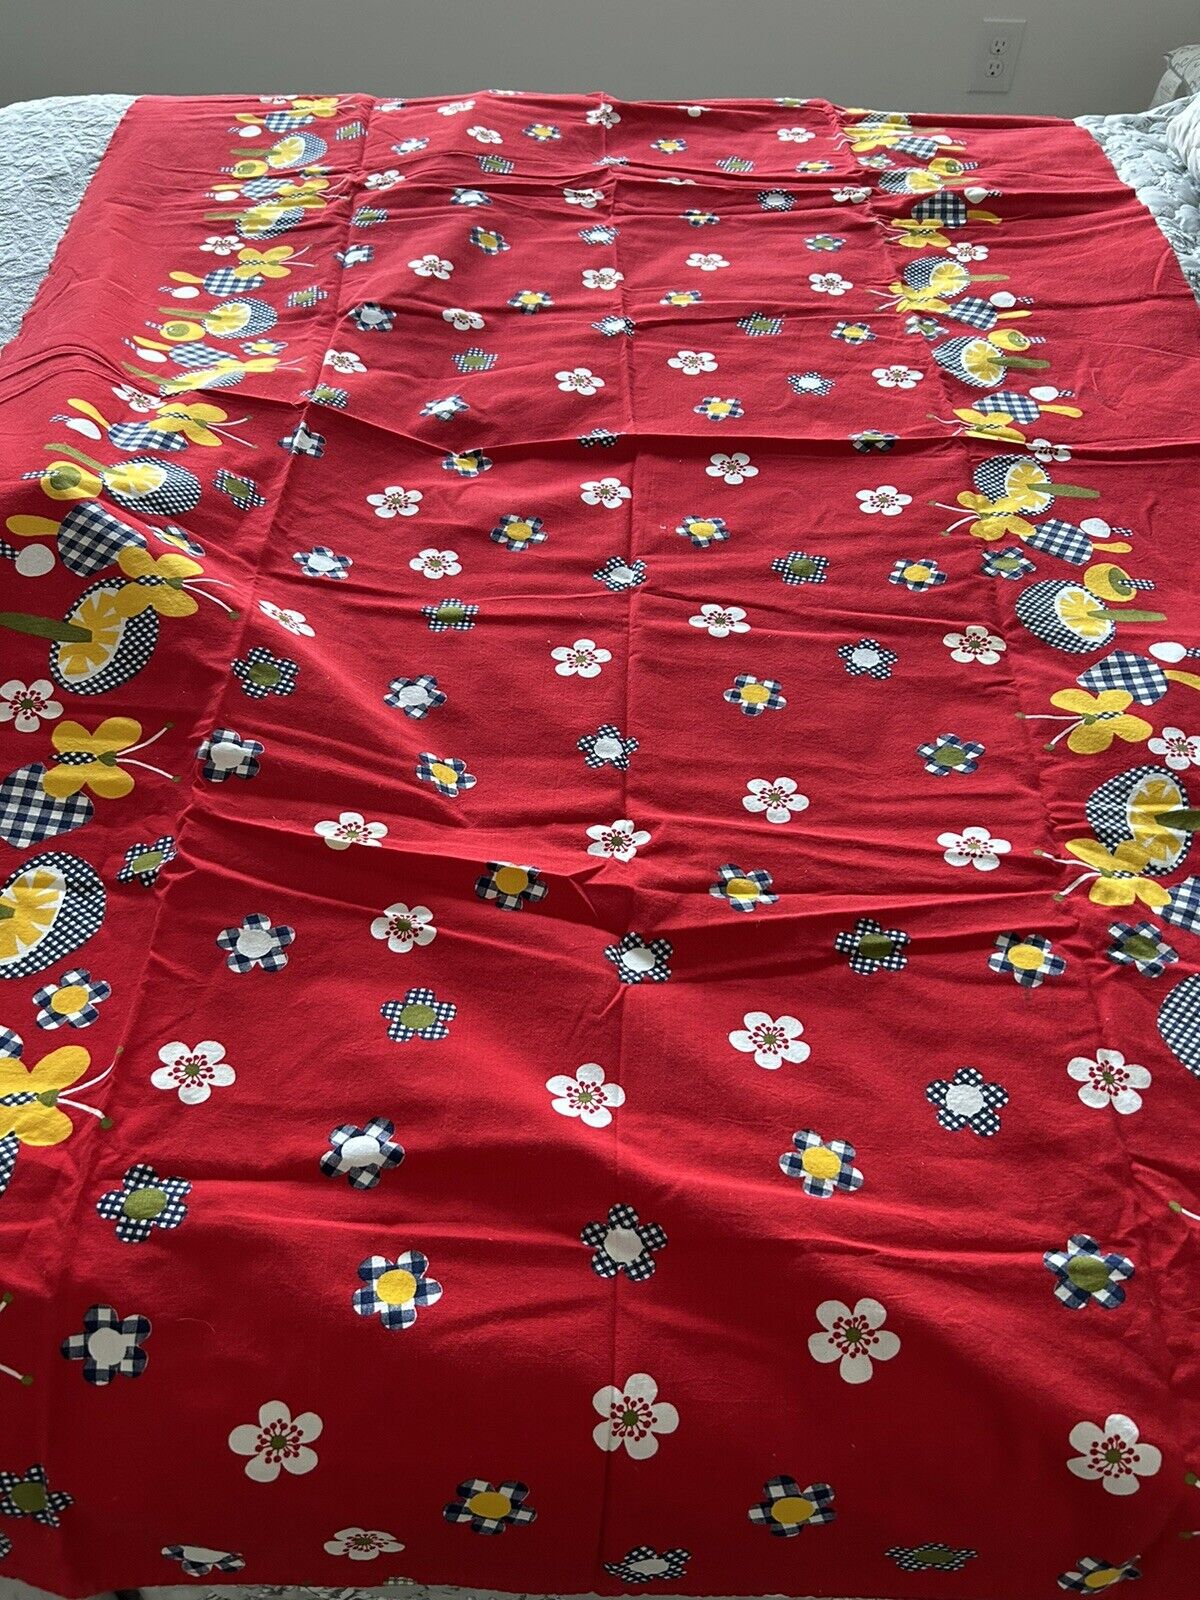 Vintage MCM Tablecloth Red Mushroom Butterflies Kitsch CottageCore 44”X 68”